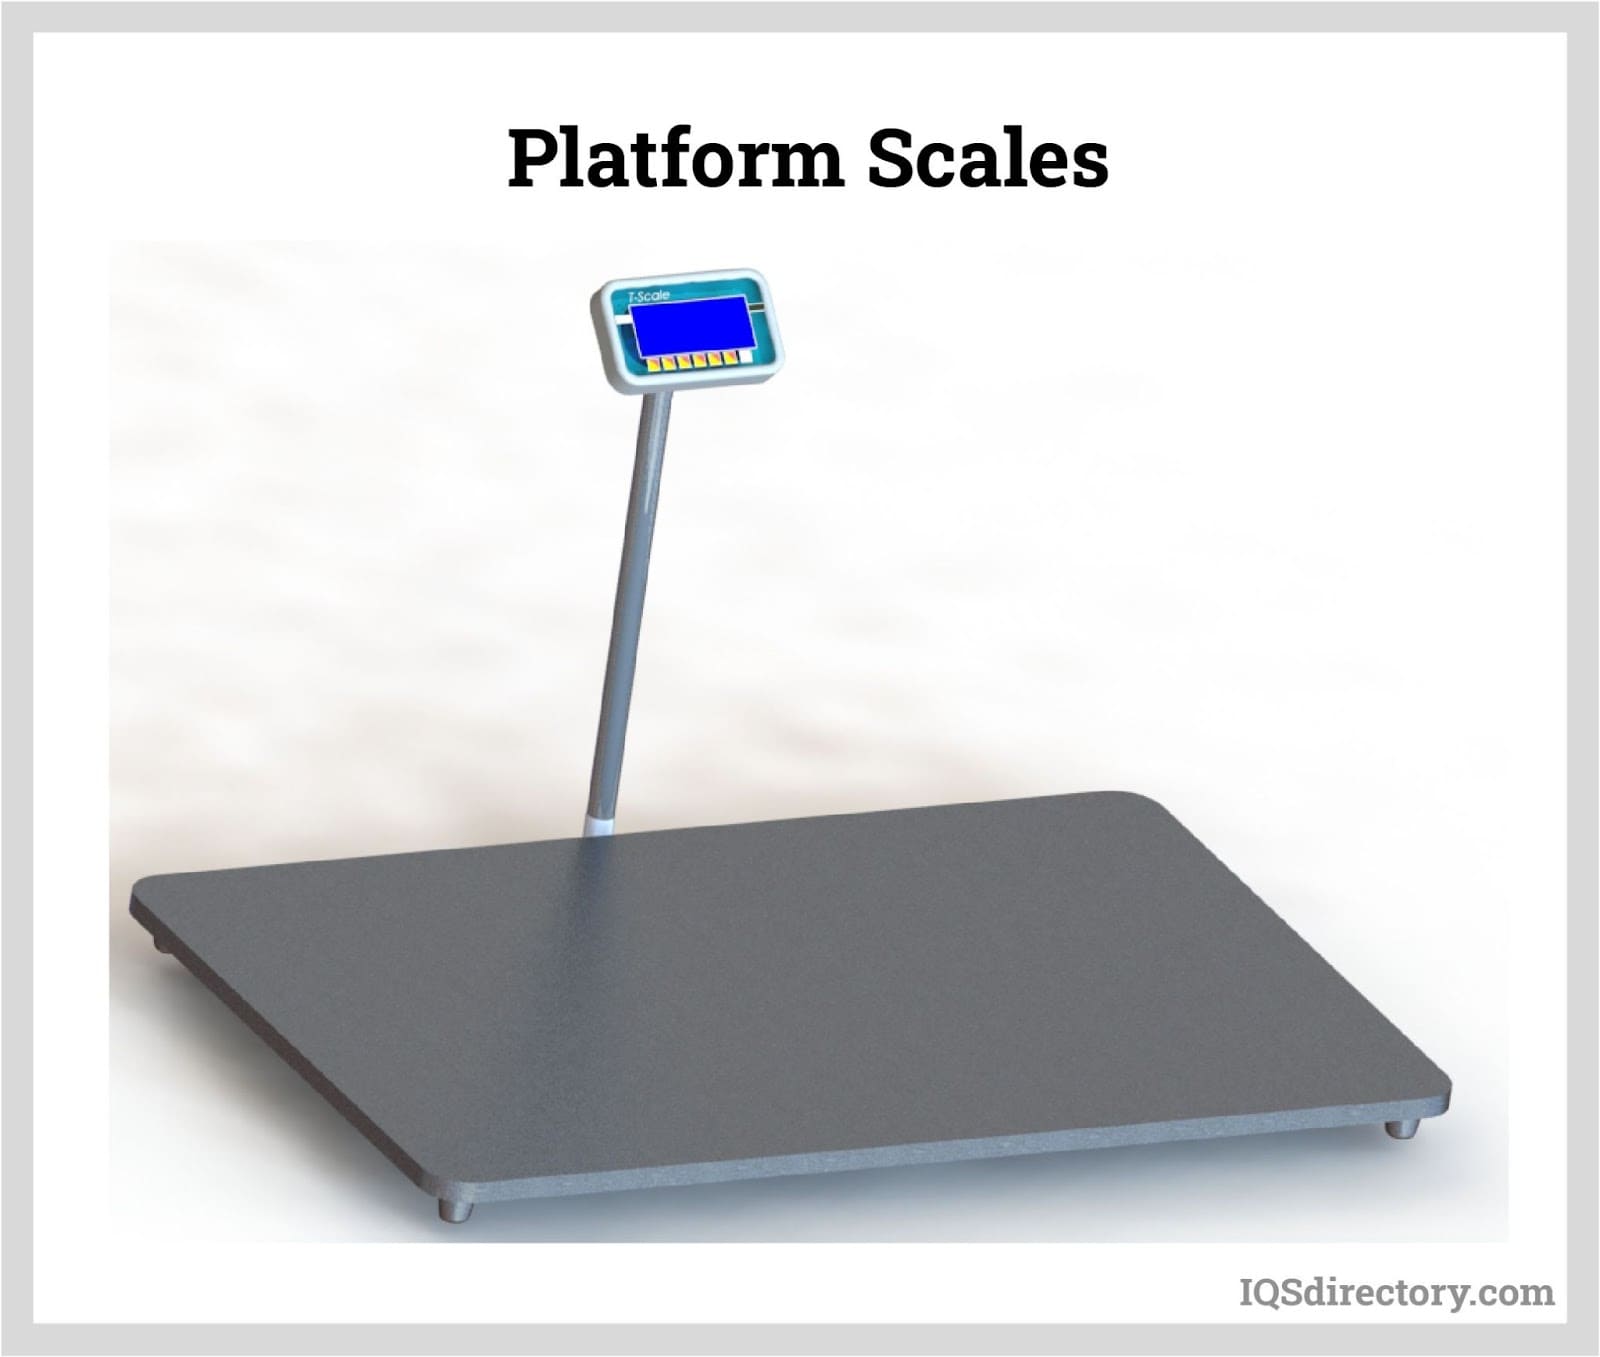 Mechanical Weighing Scale vs. Digital Weighing Scale